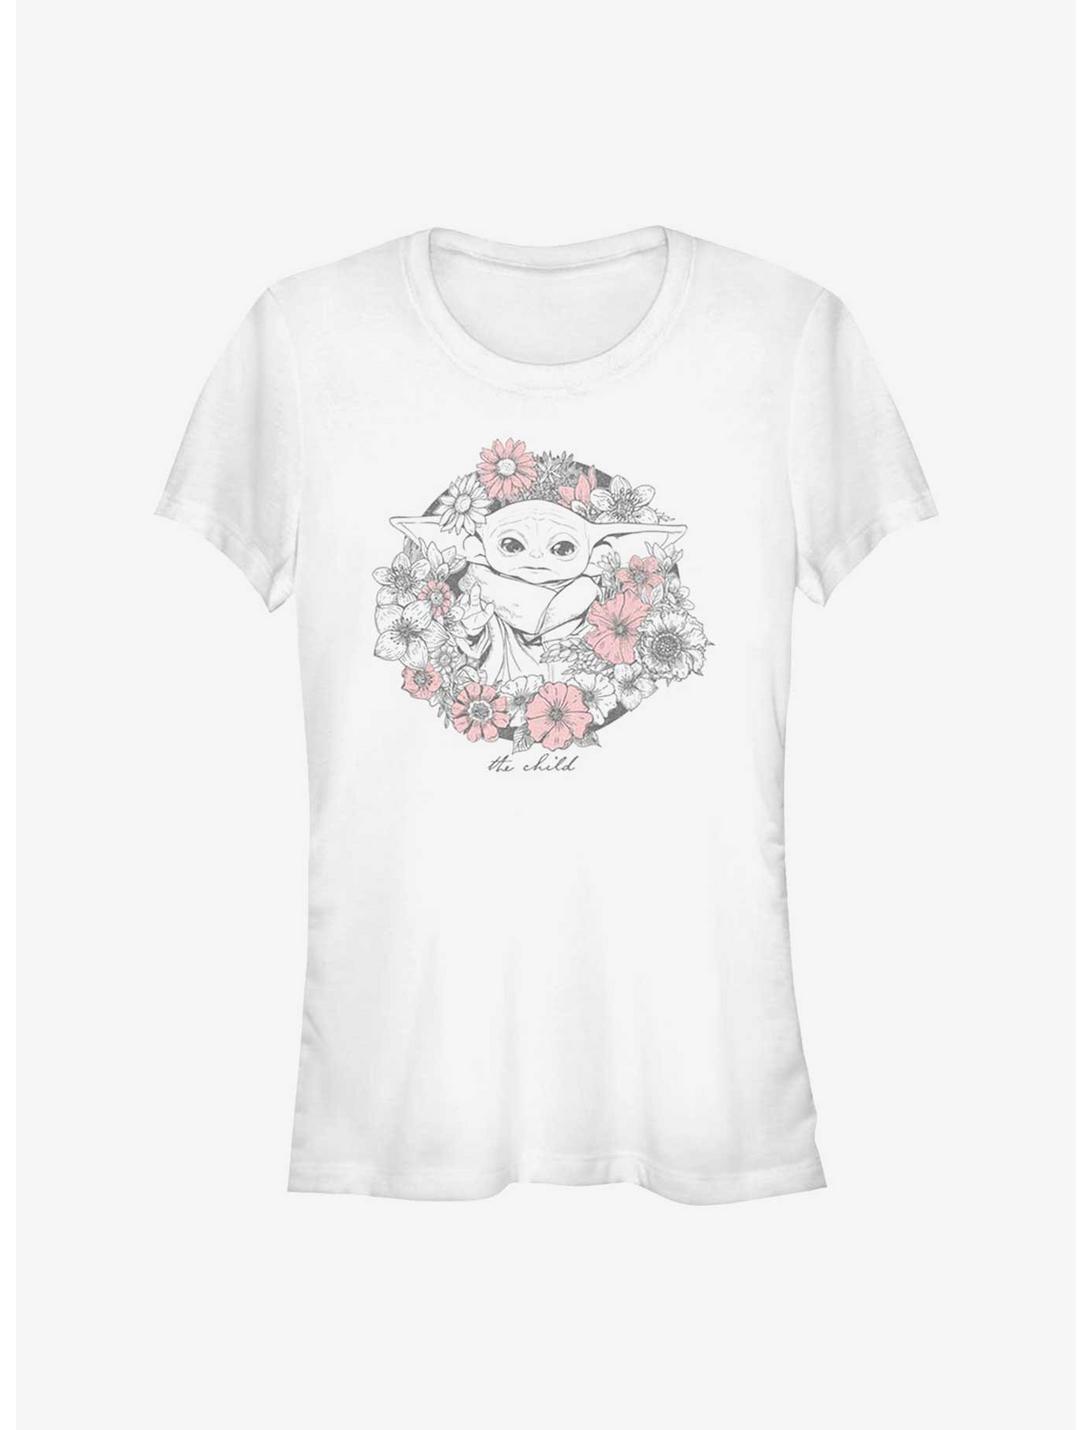 Star Wars The Mandalorian The Child Floral Girls T-Shirt, WHITE, hi-res